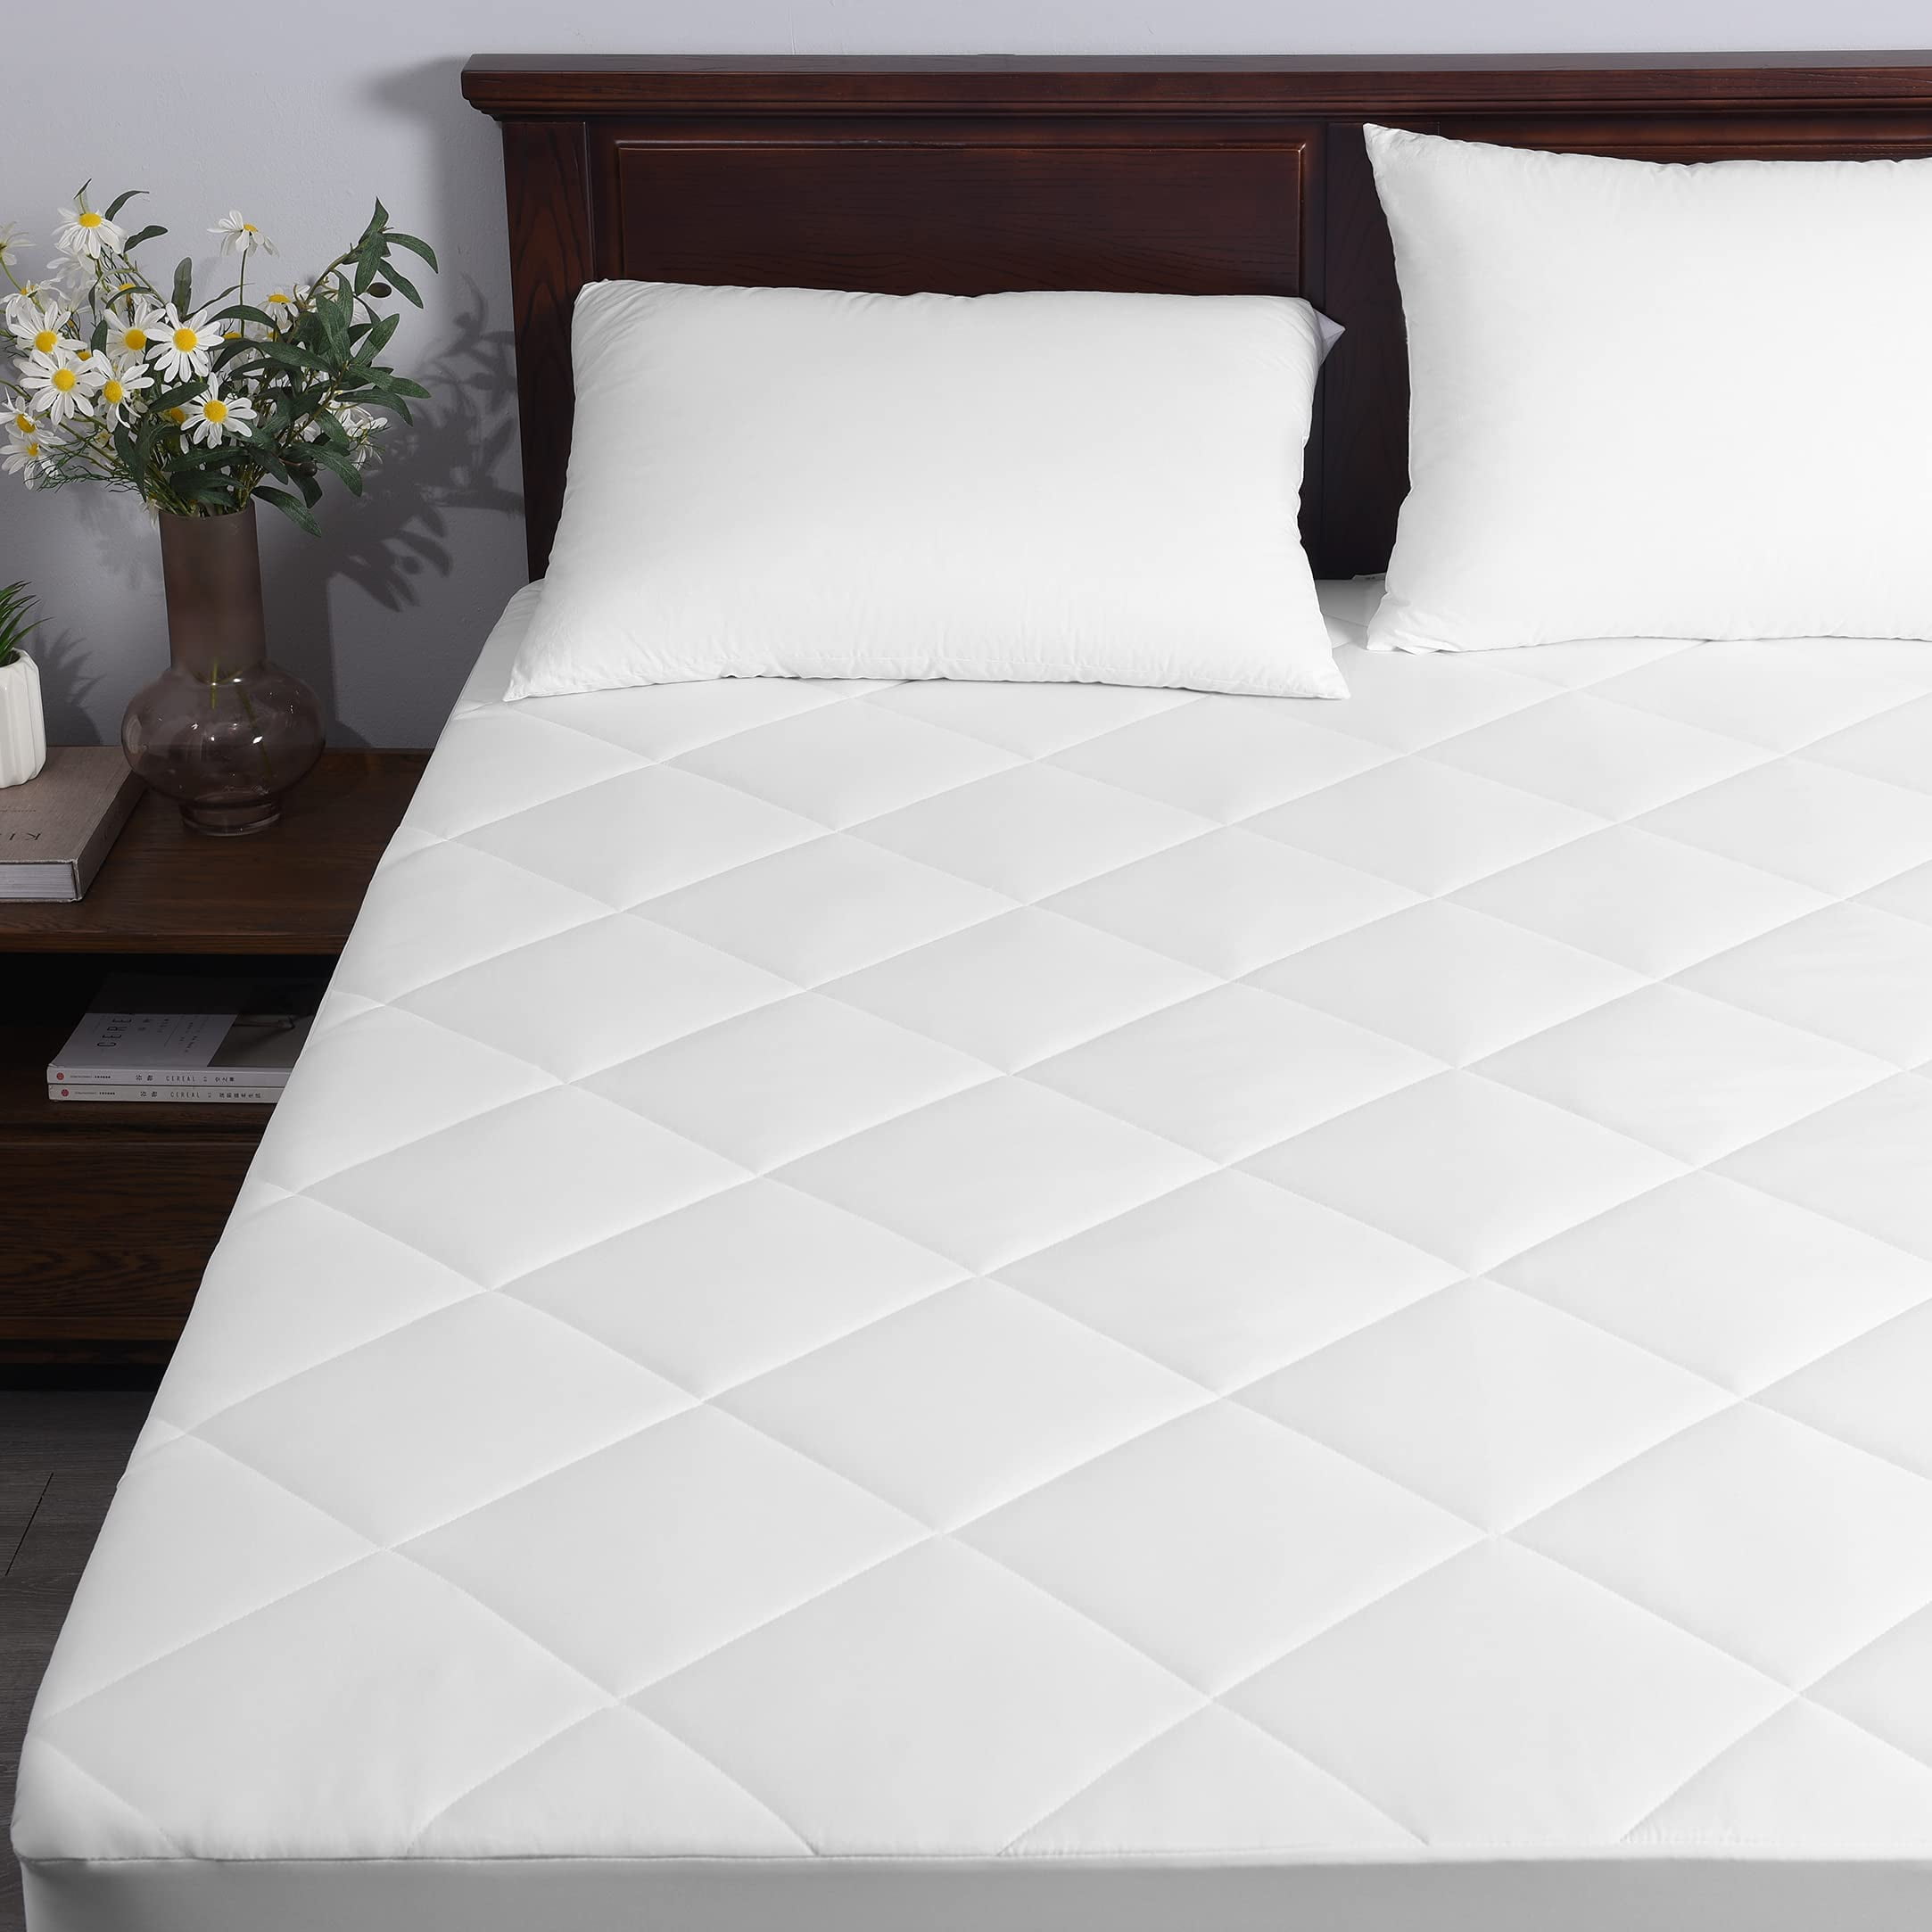 Extra Deep Quilted fitted matress Mattress protector hygienic & Non-Allergenic 